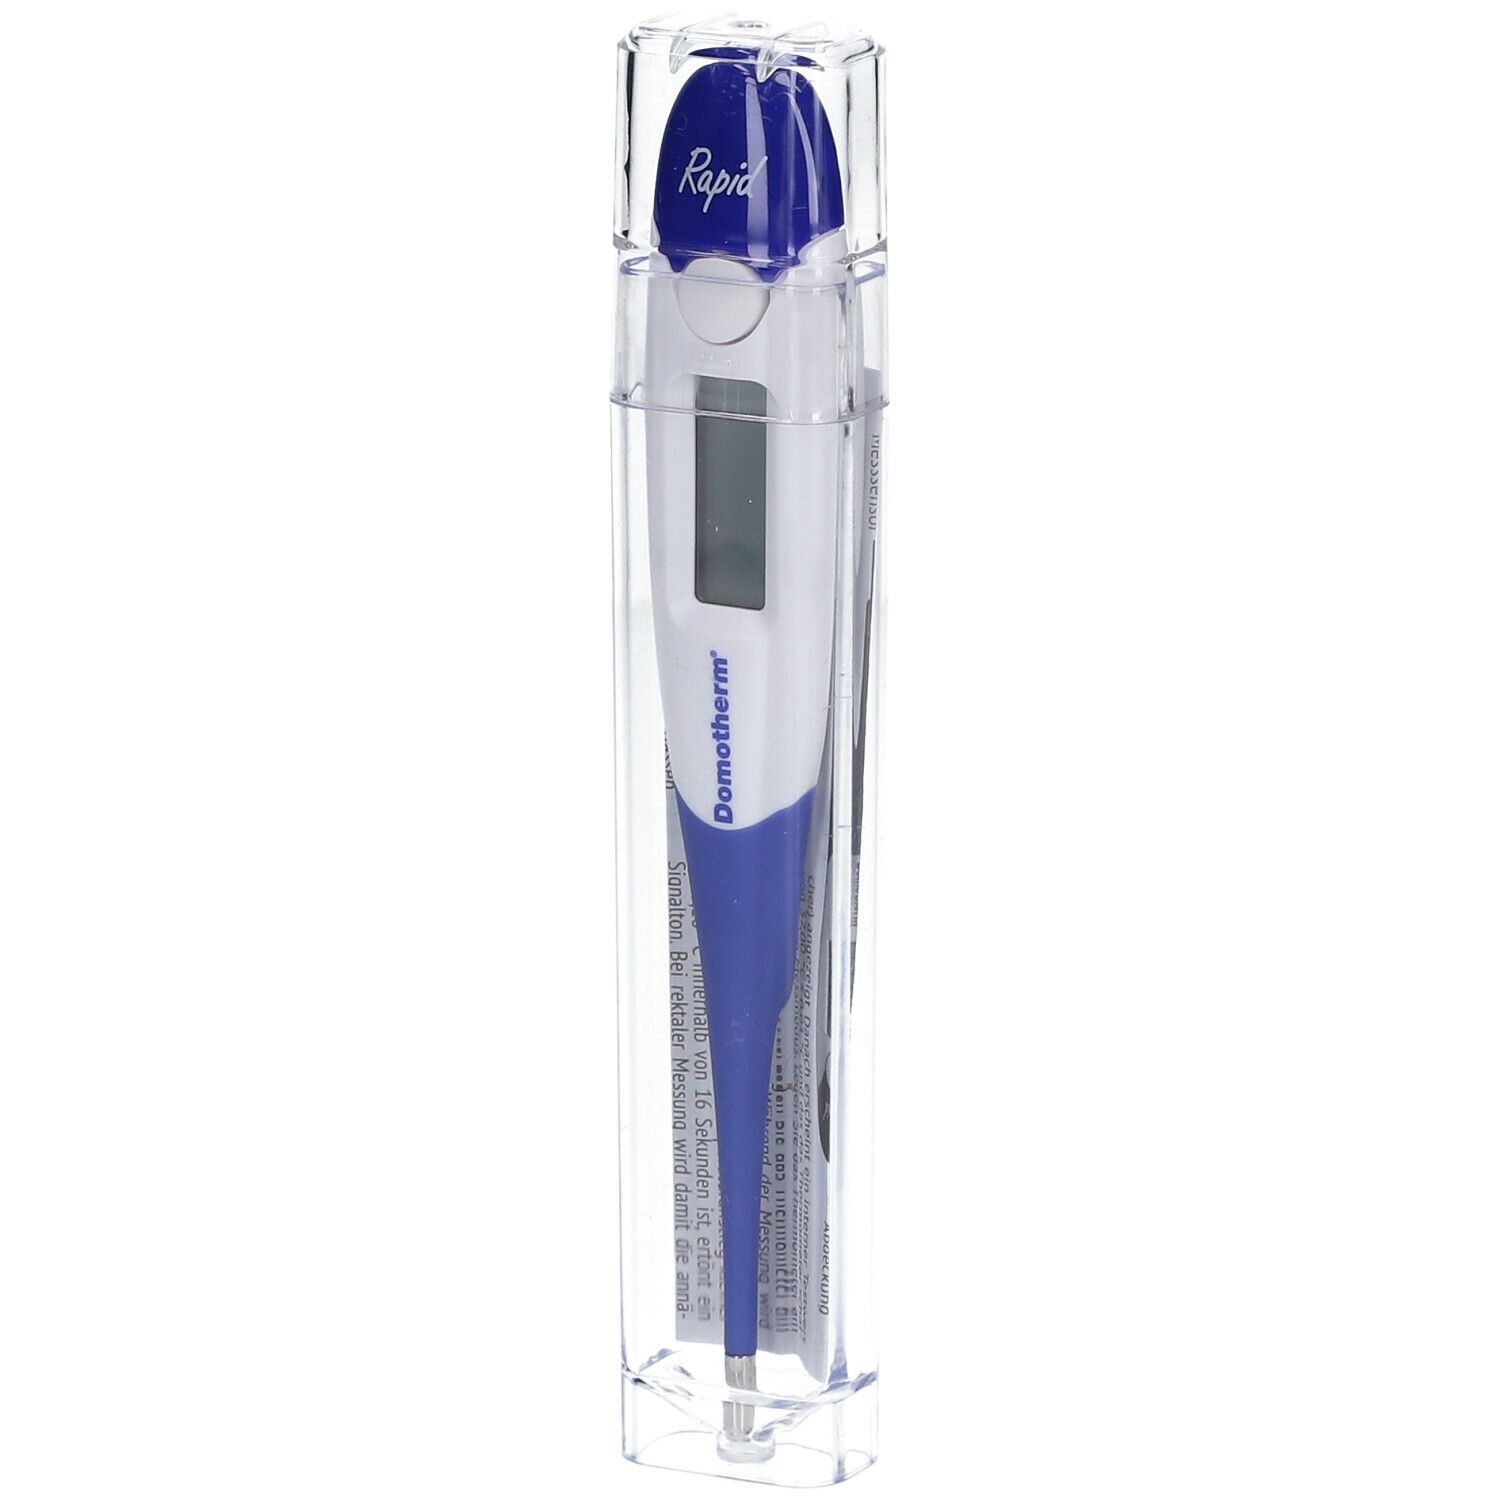 Domotherm® Rapid Digitalthermometer